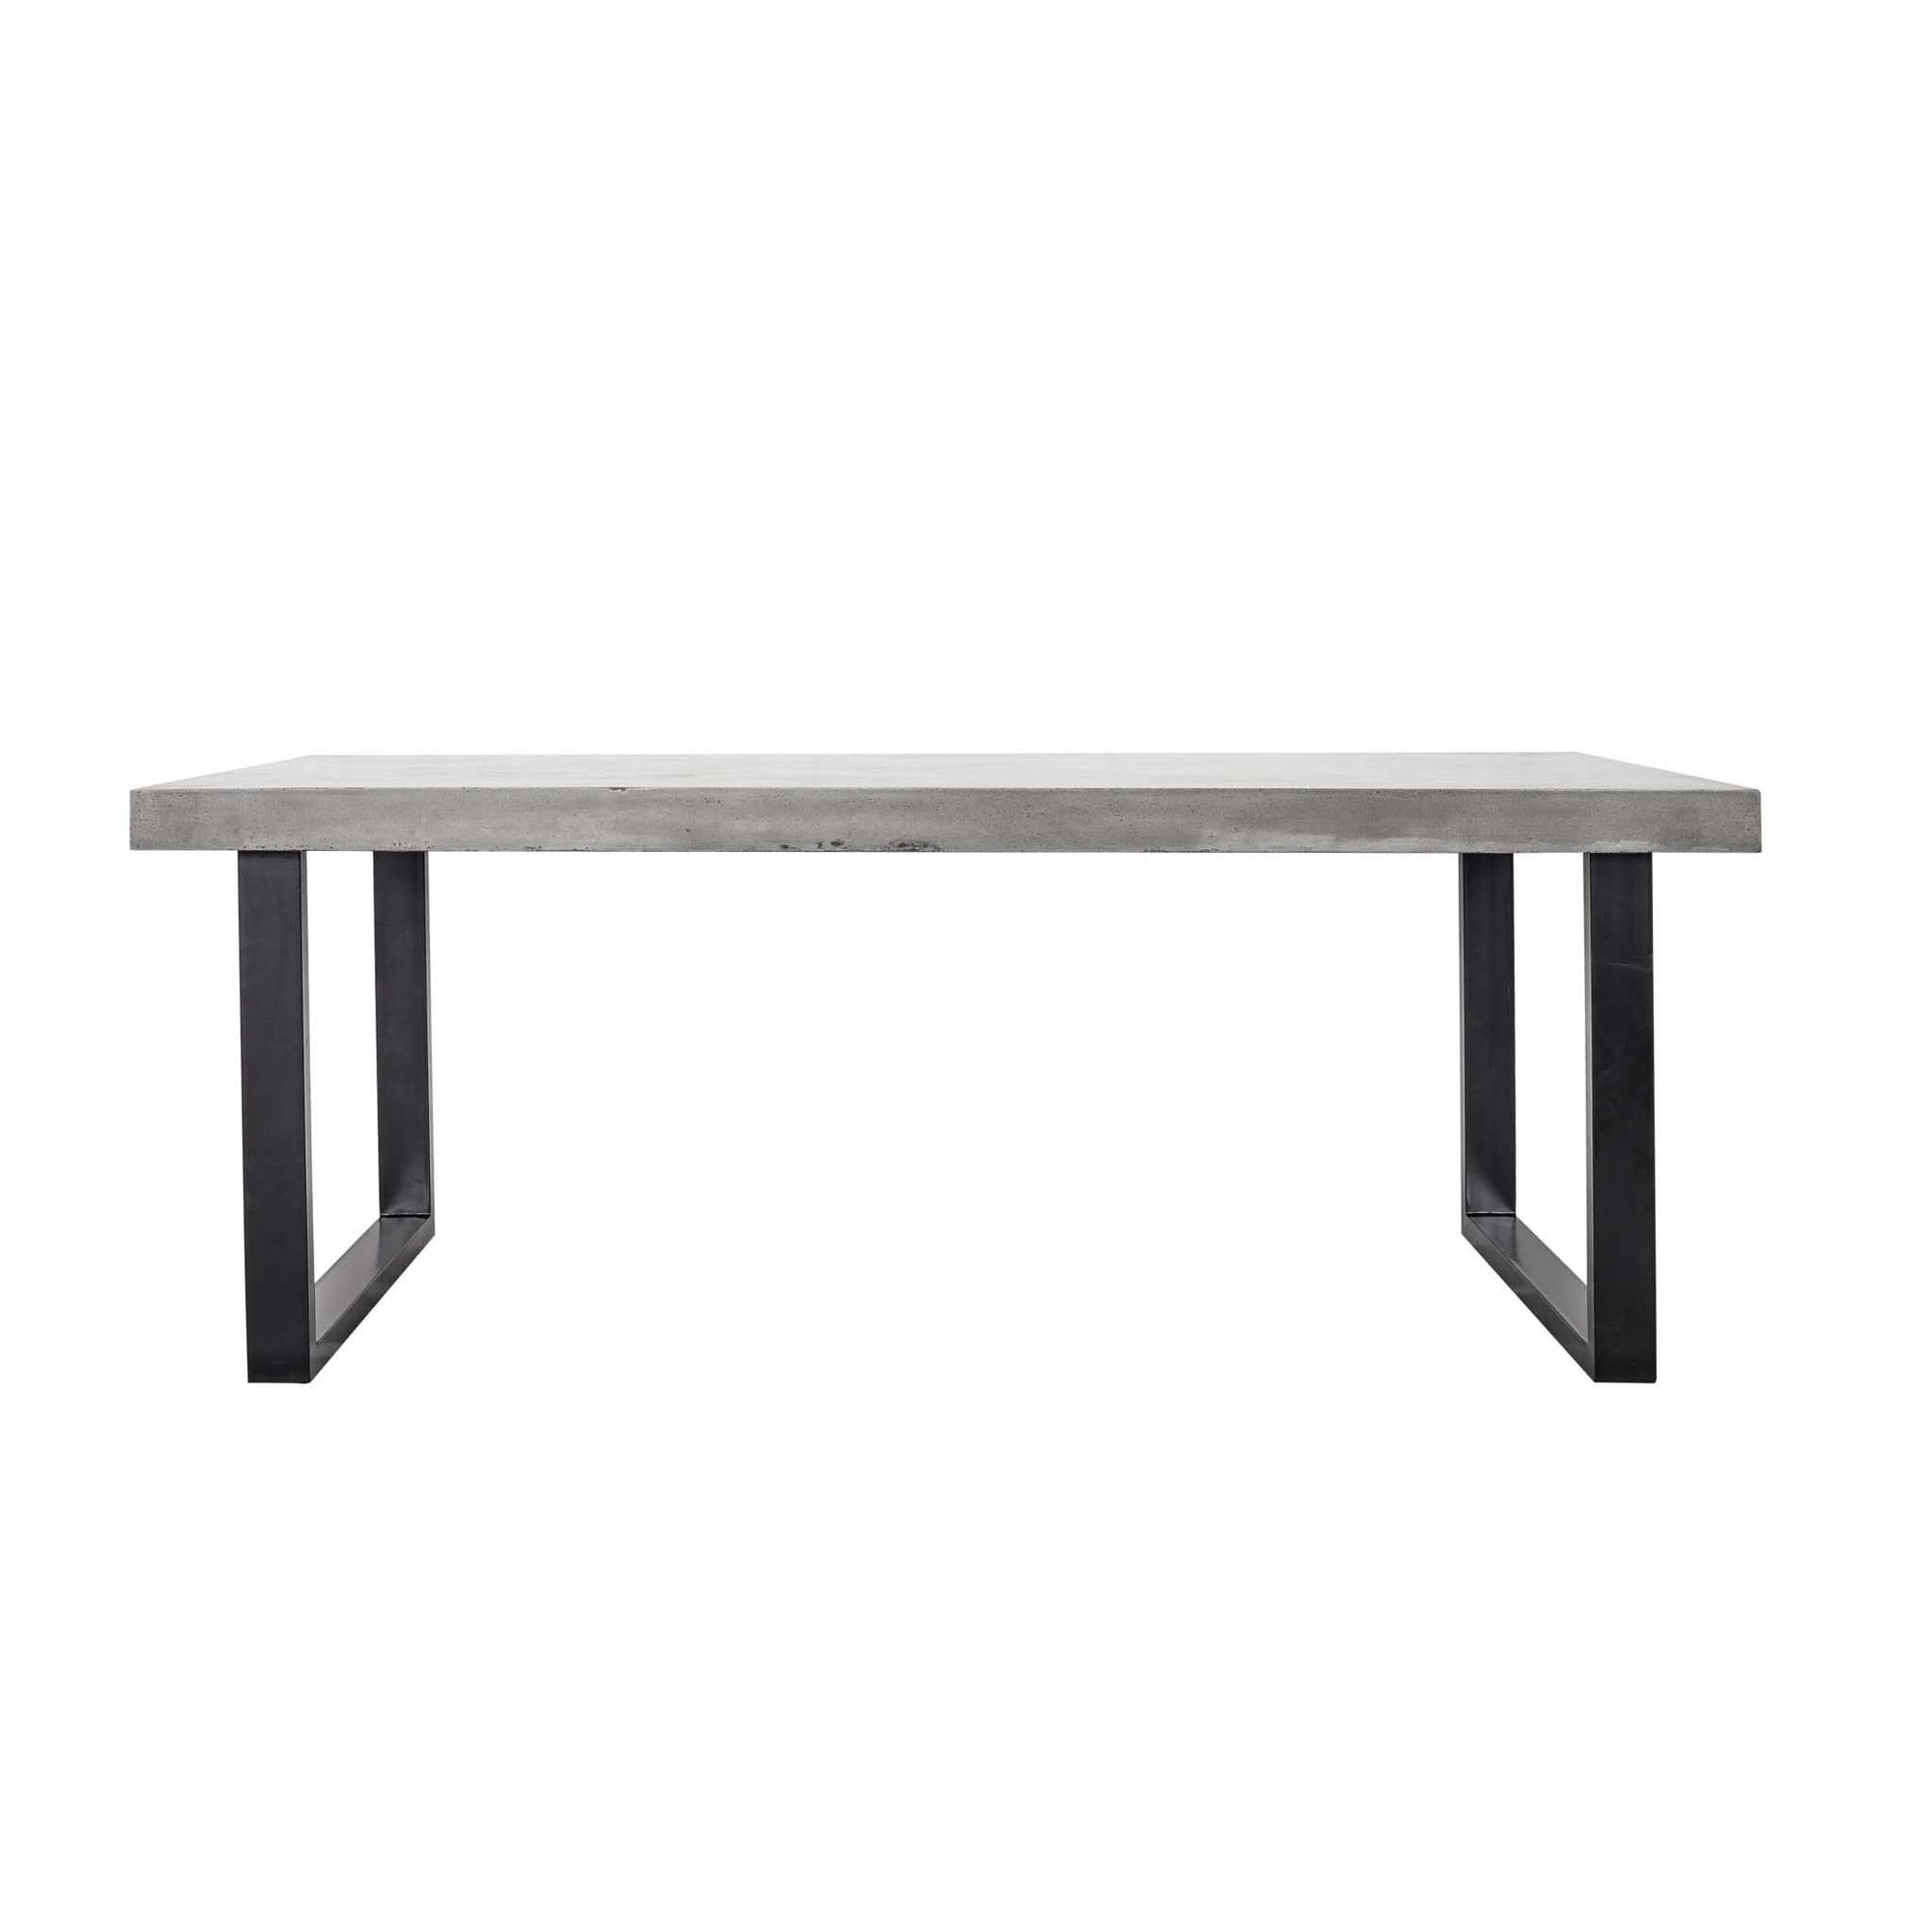 MOES-JEDRIK OUTDOOR DINING TABLE SMALL-Outdoor Dining Tables-MODTEMPO